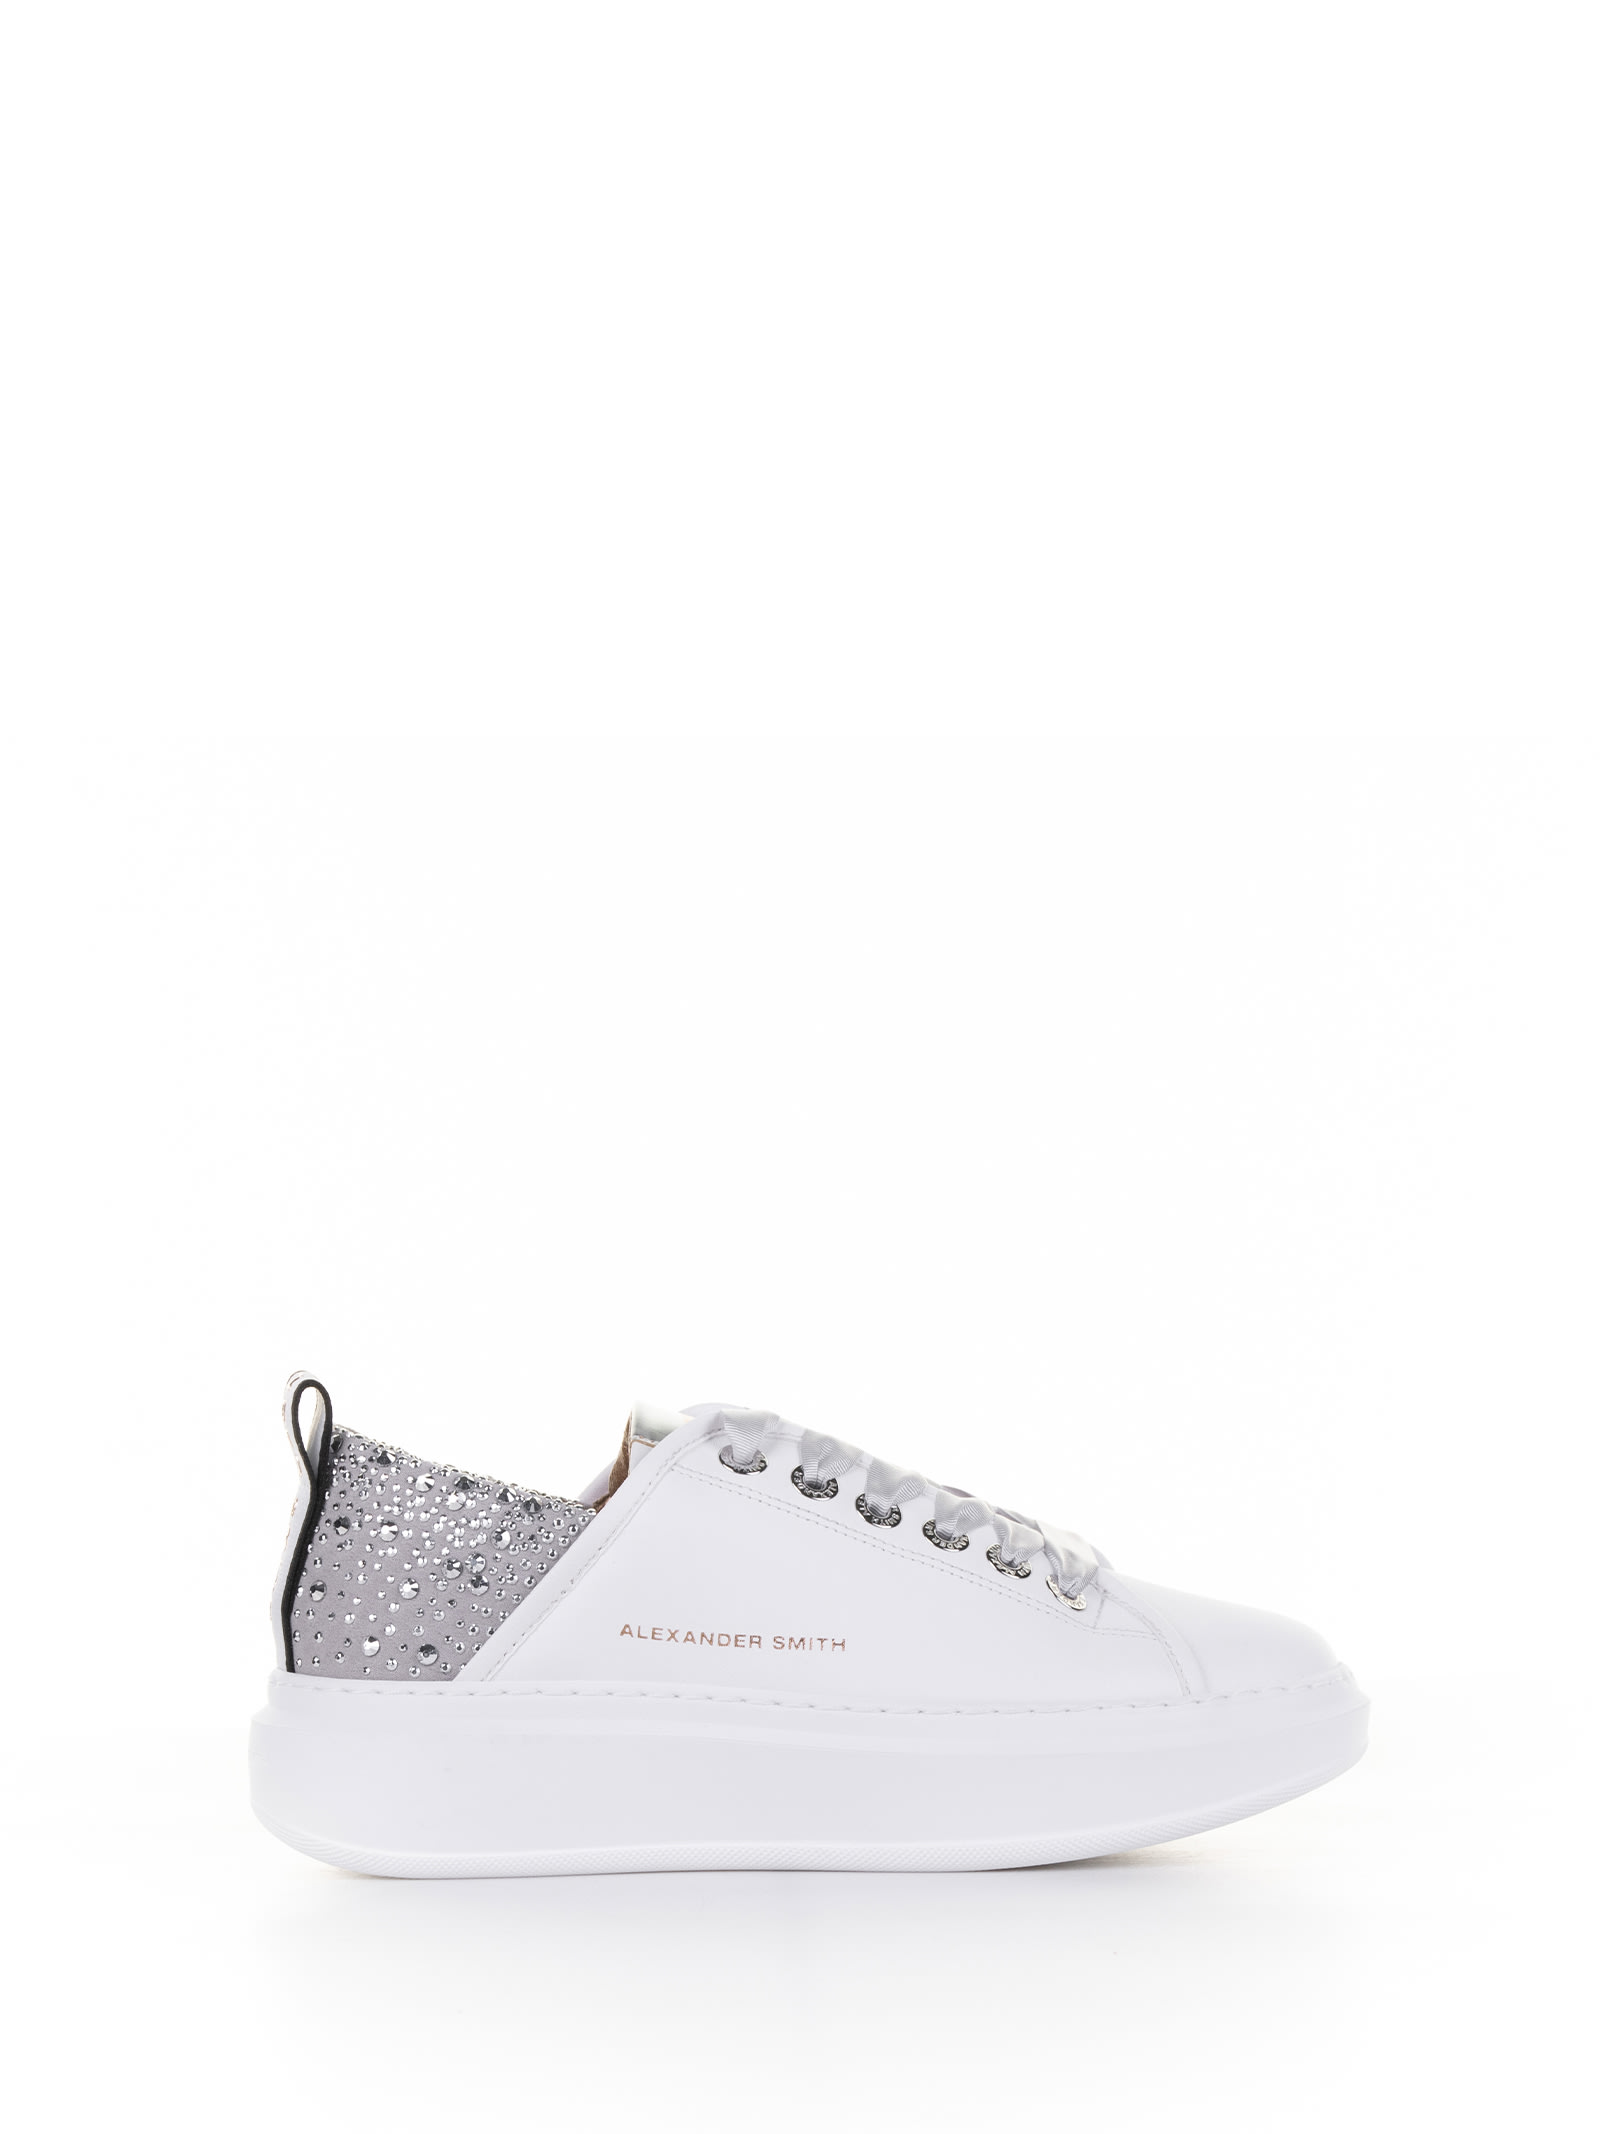 Alexander Smith Wembley Sneaker In Leather And Rhinestones In White Siver